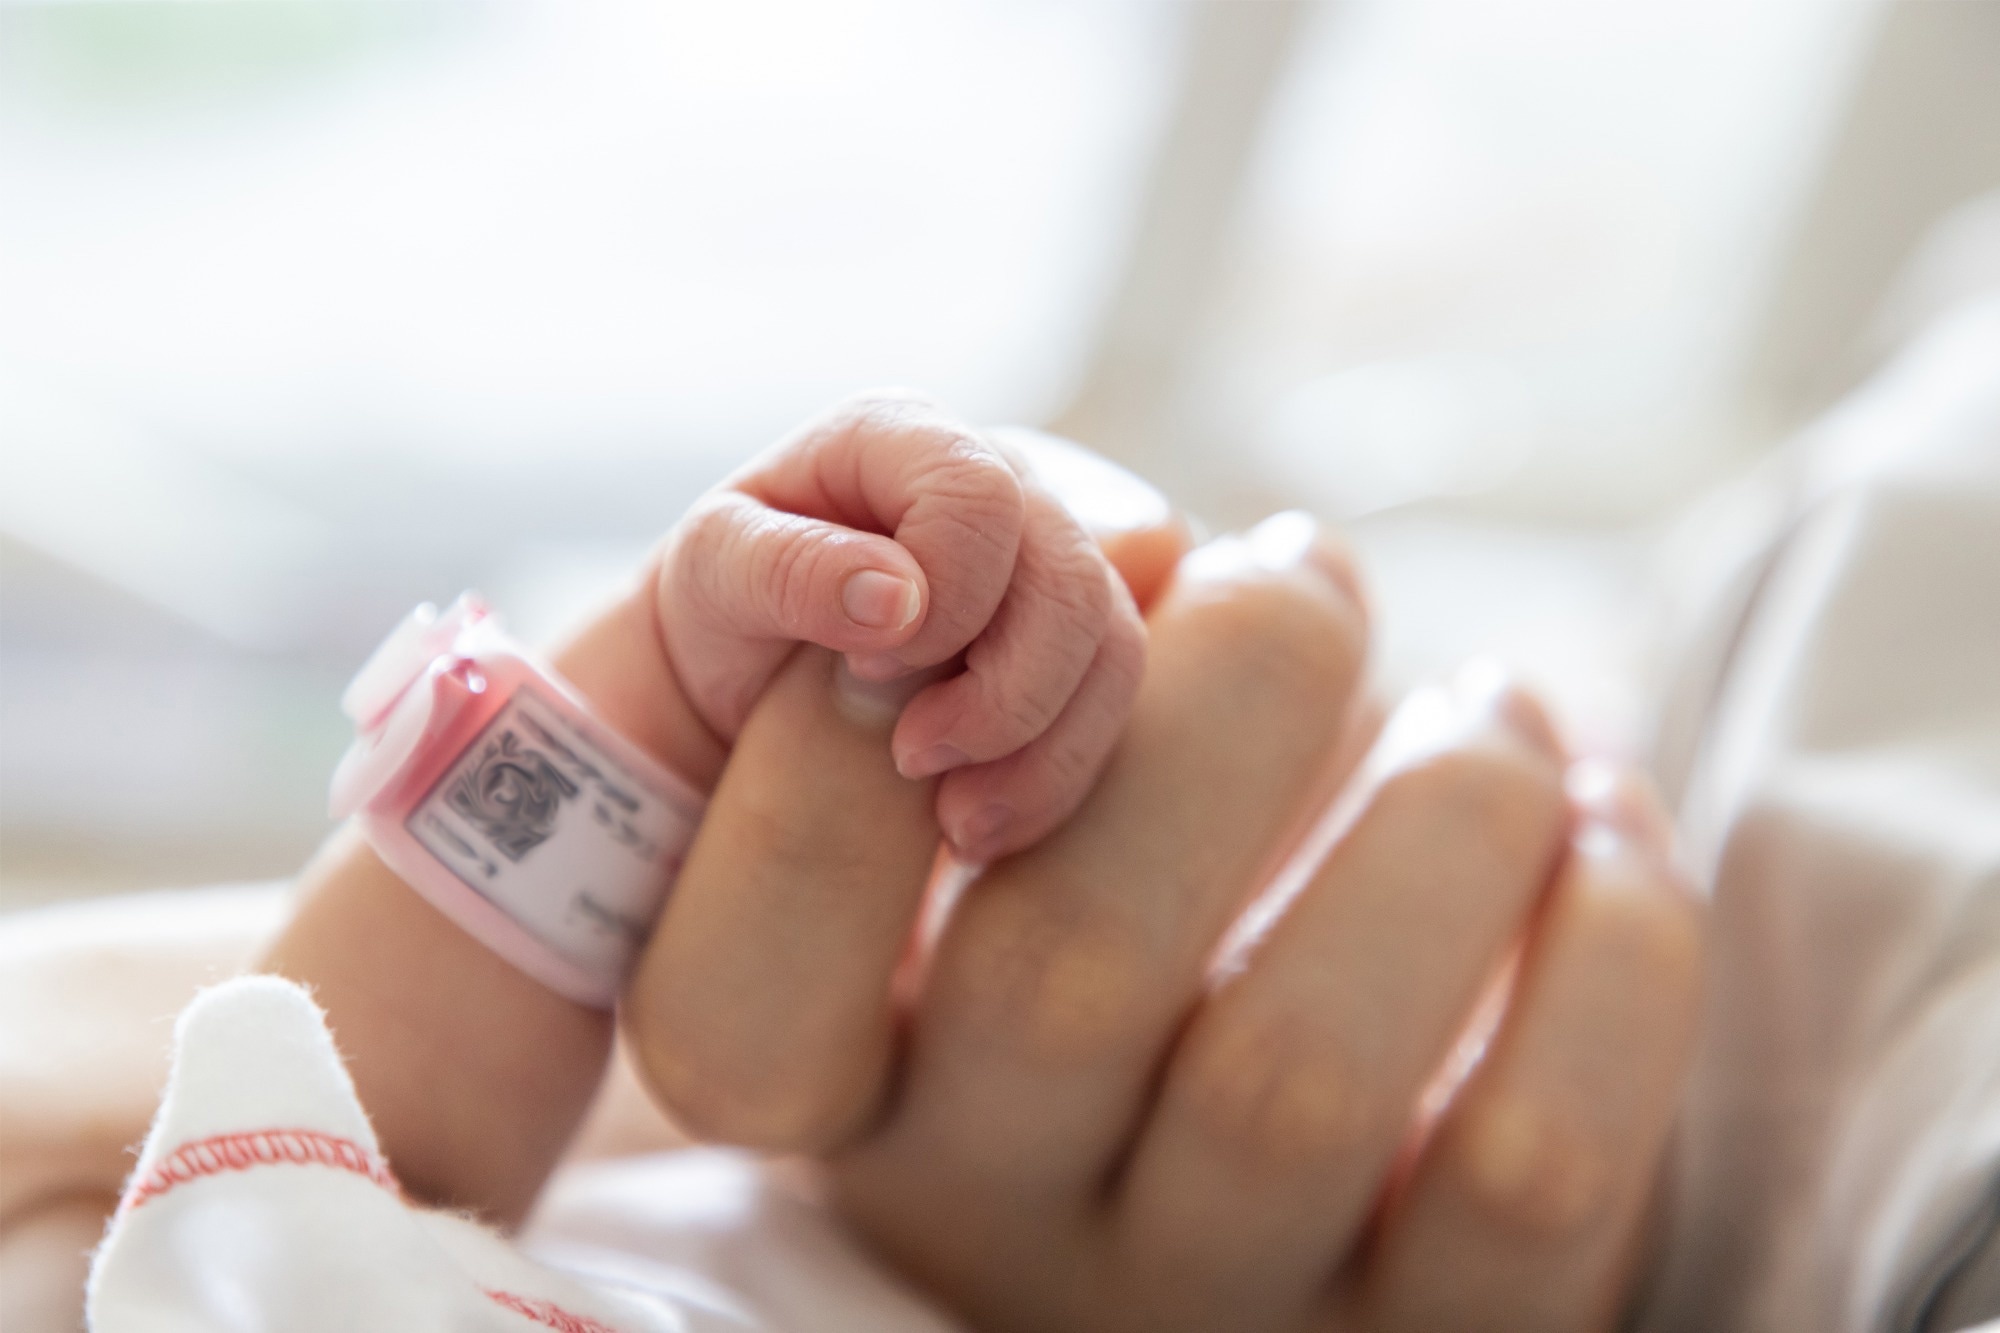 Study: Human Milk Calorie Guide: A Novel Color-Based Tool to Estimate the Calorie Content of Human Milk for Preterm Infants. Image Credit: Ratchat / Shutterstock